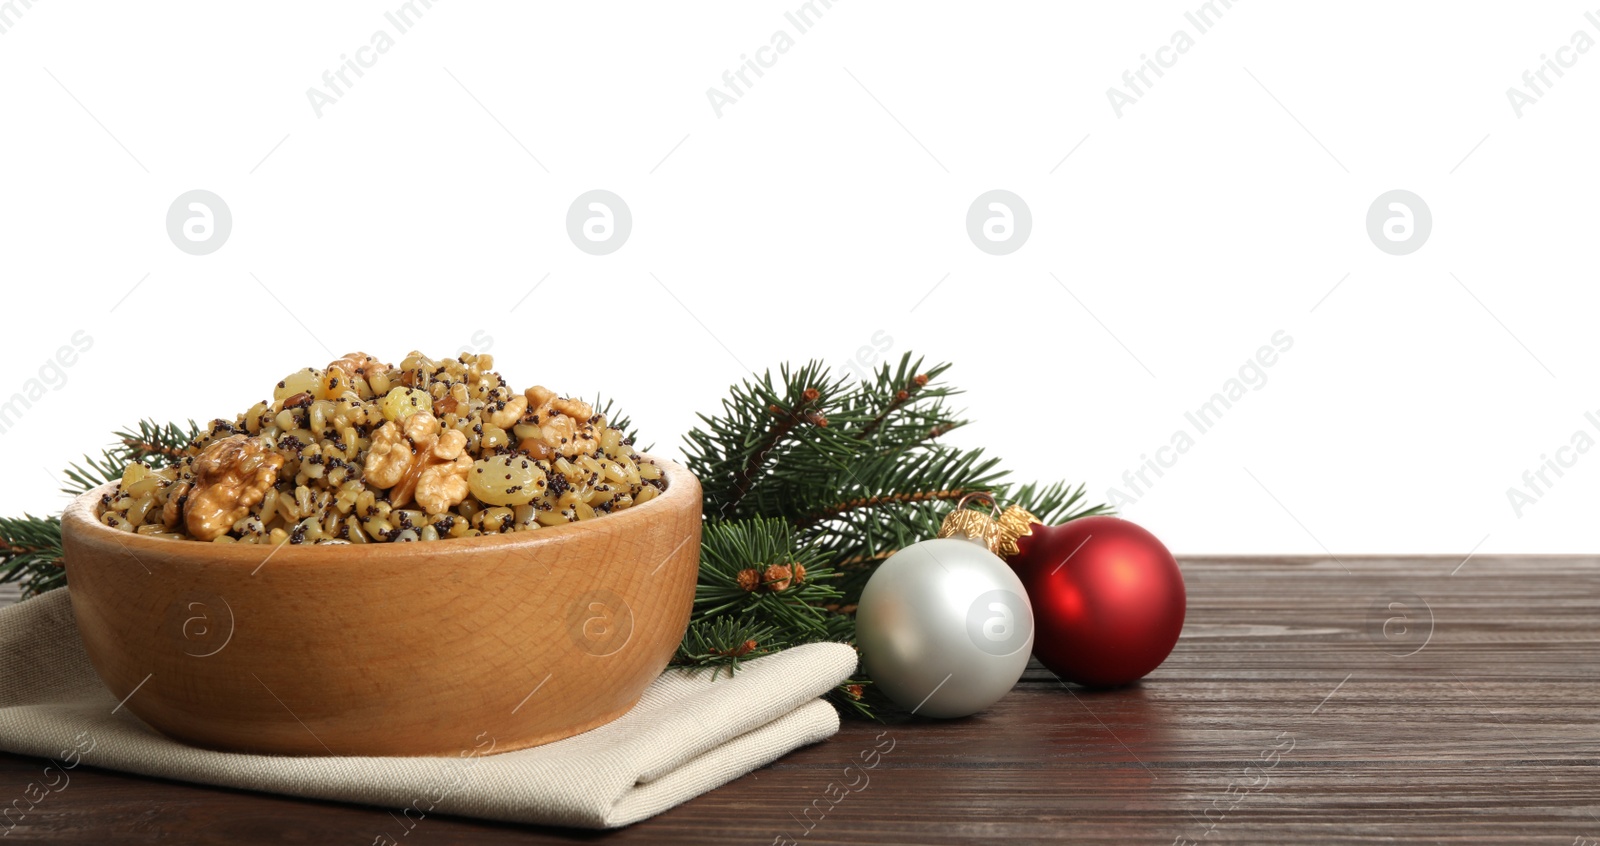 Photo of Traditional Christmas slavic dish kutia and festive decor on wooden table against white background